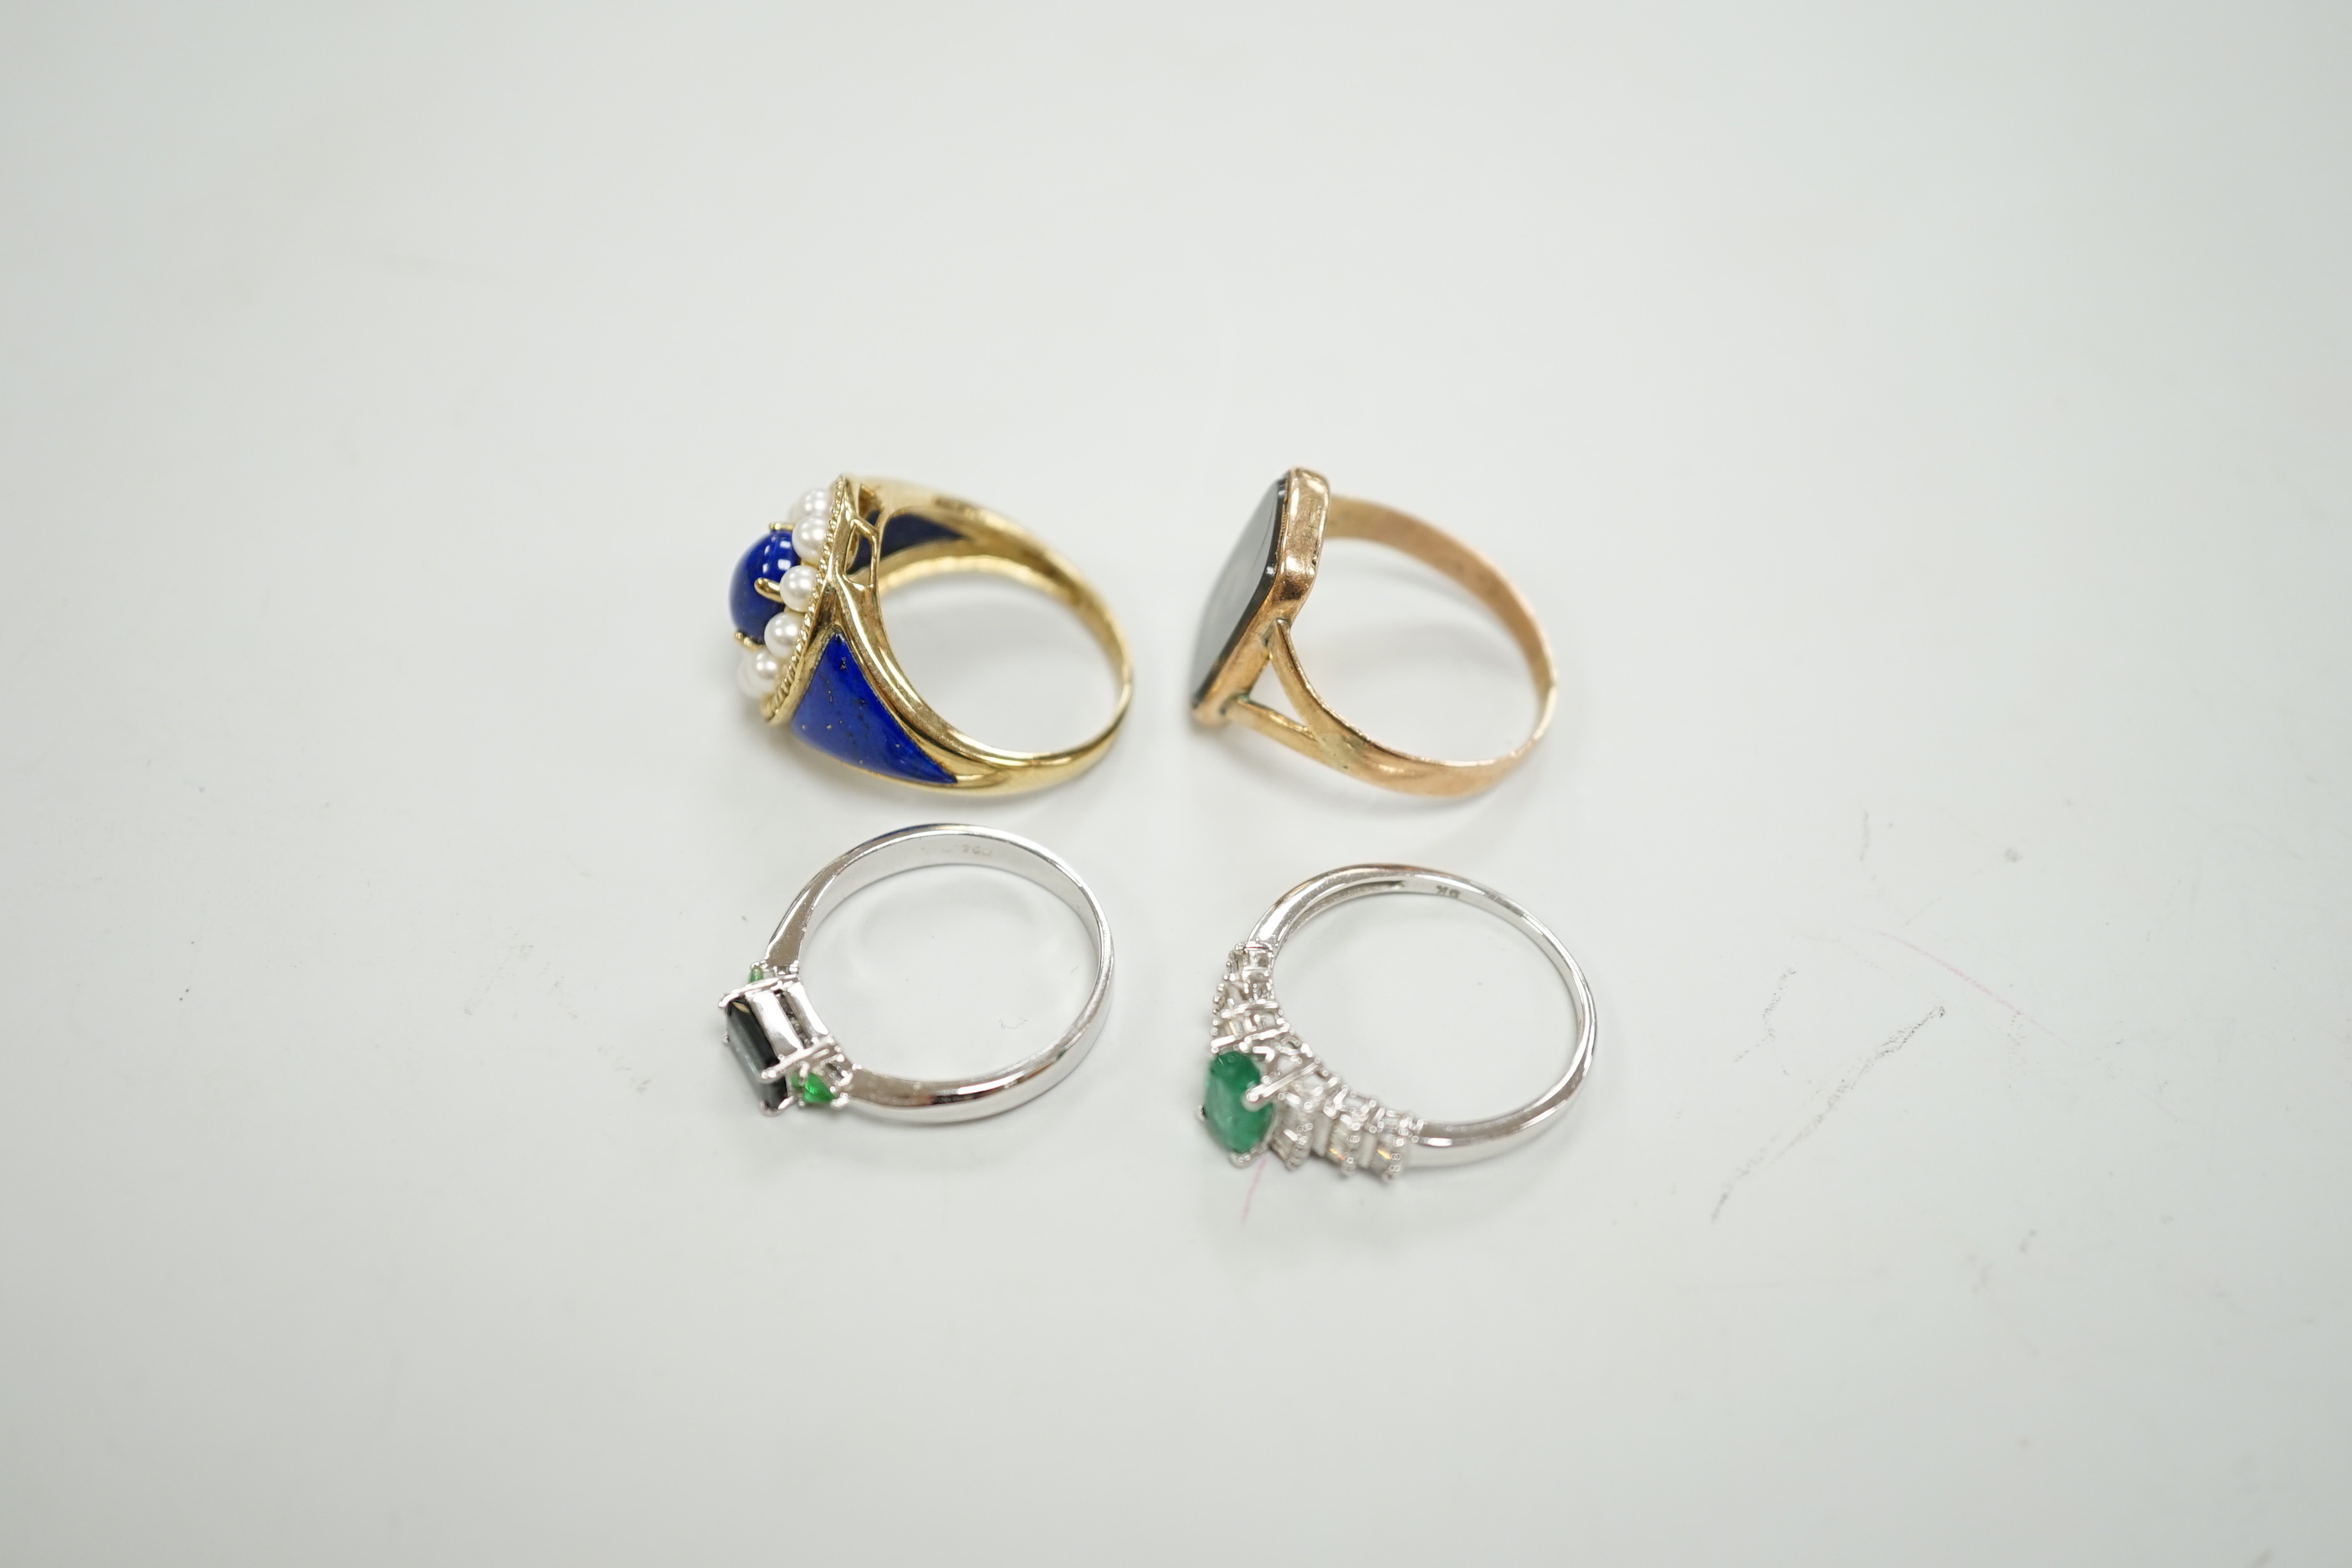 A modern 750 white metal and three stone gem set ring, two 9ct gold and gem set rings including lapis and seed pearl and one other yellow metal ring.